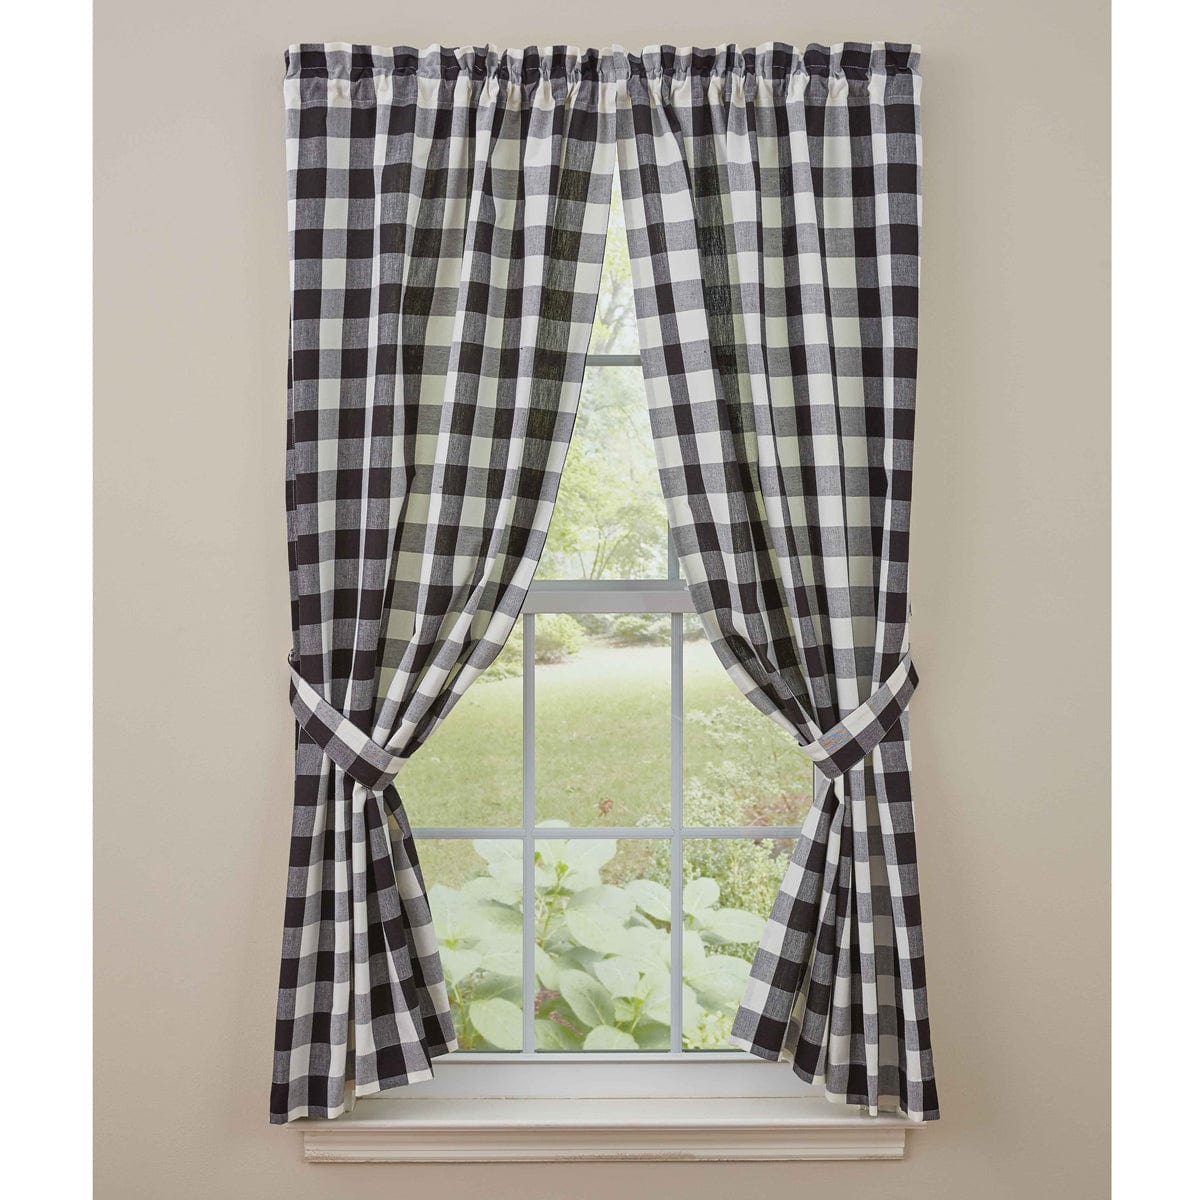 Wicklow Check in Black & Cream Panel Pair With Tie Backs 63" Long Unlined-Park Designs-The Village Merchant